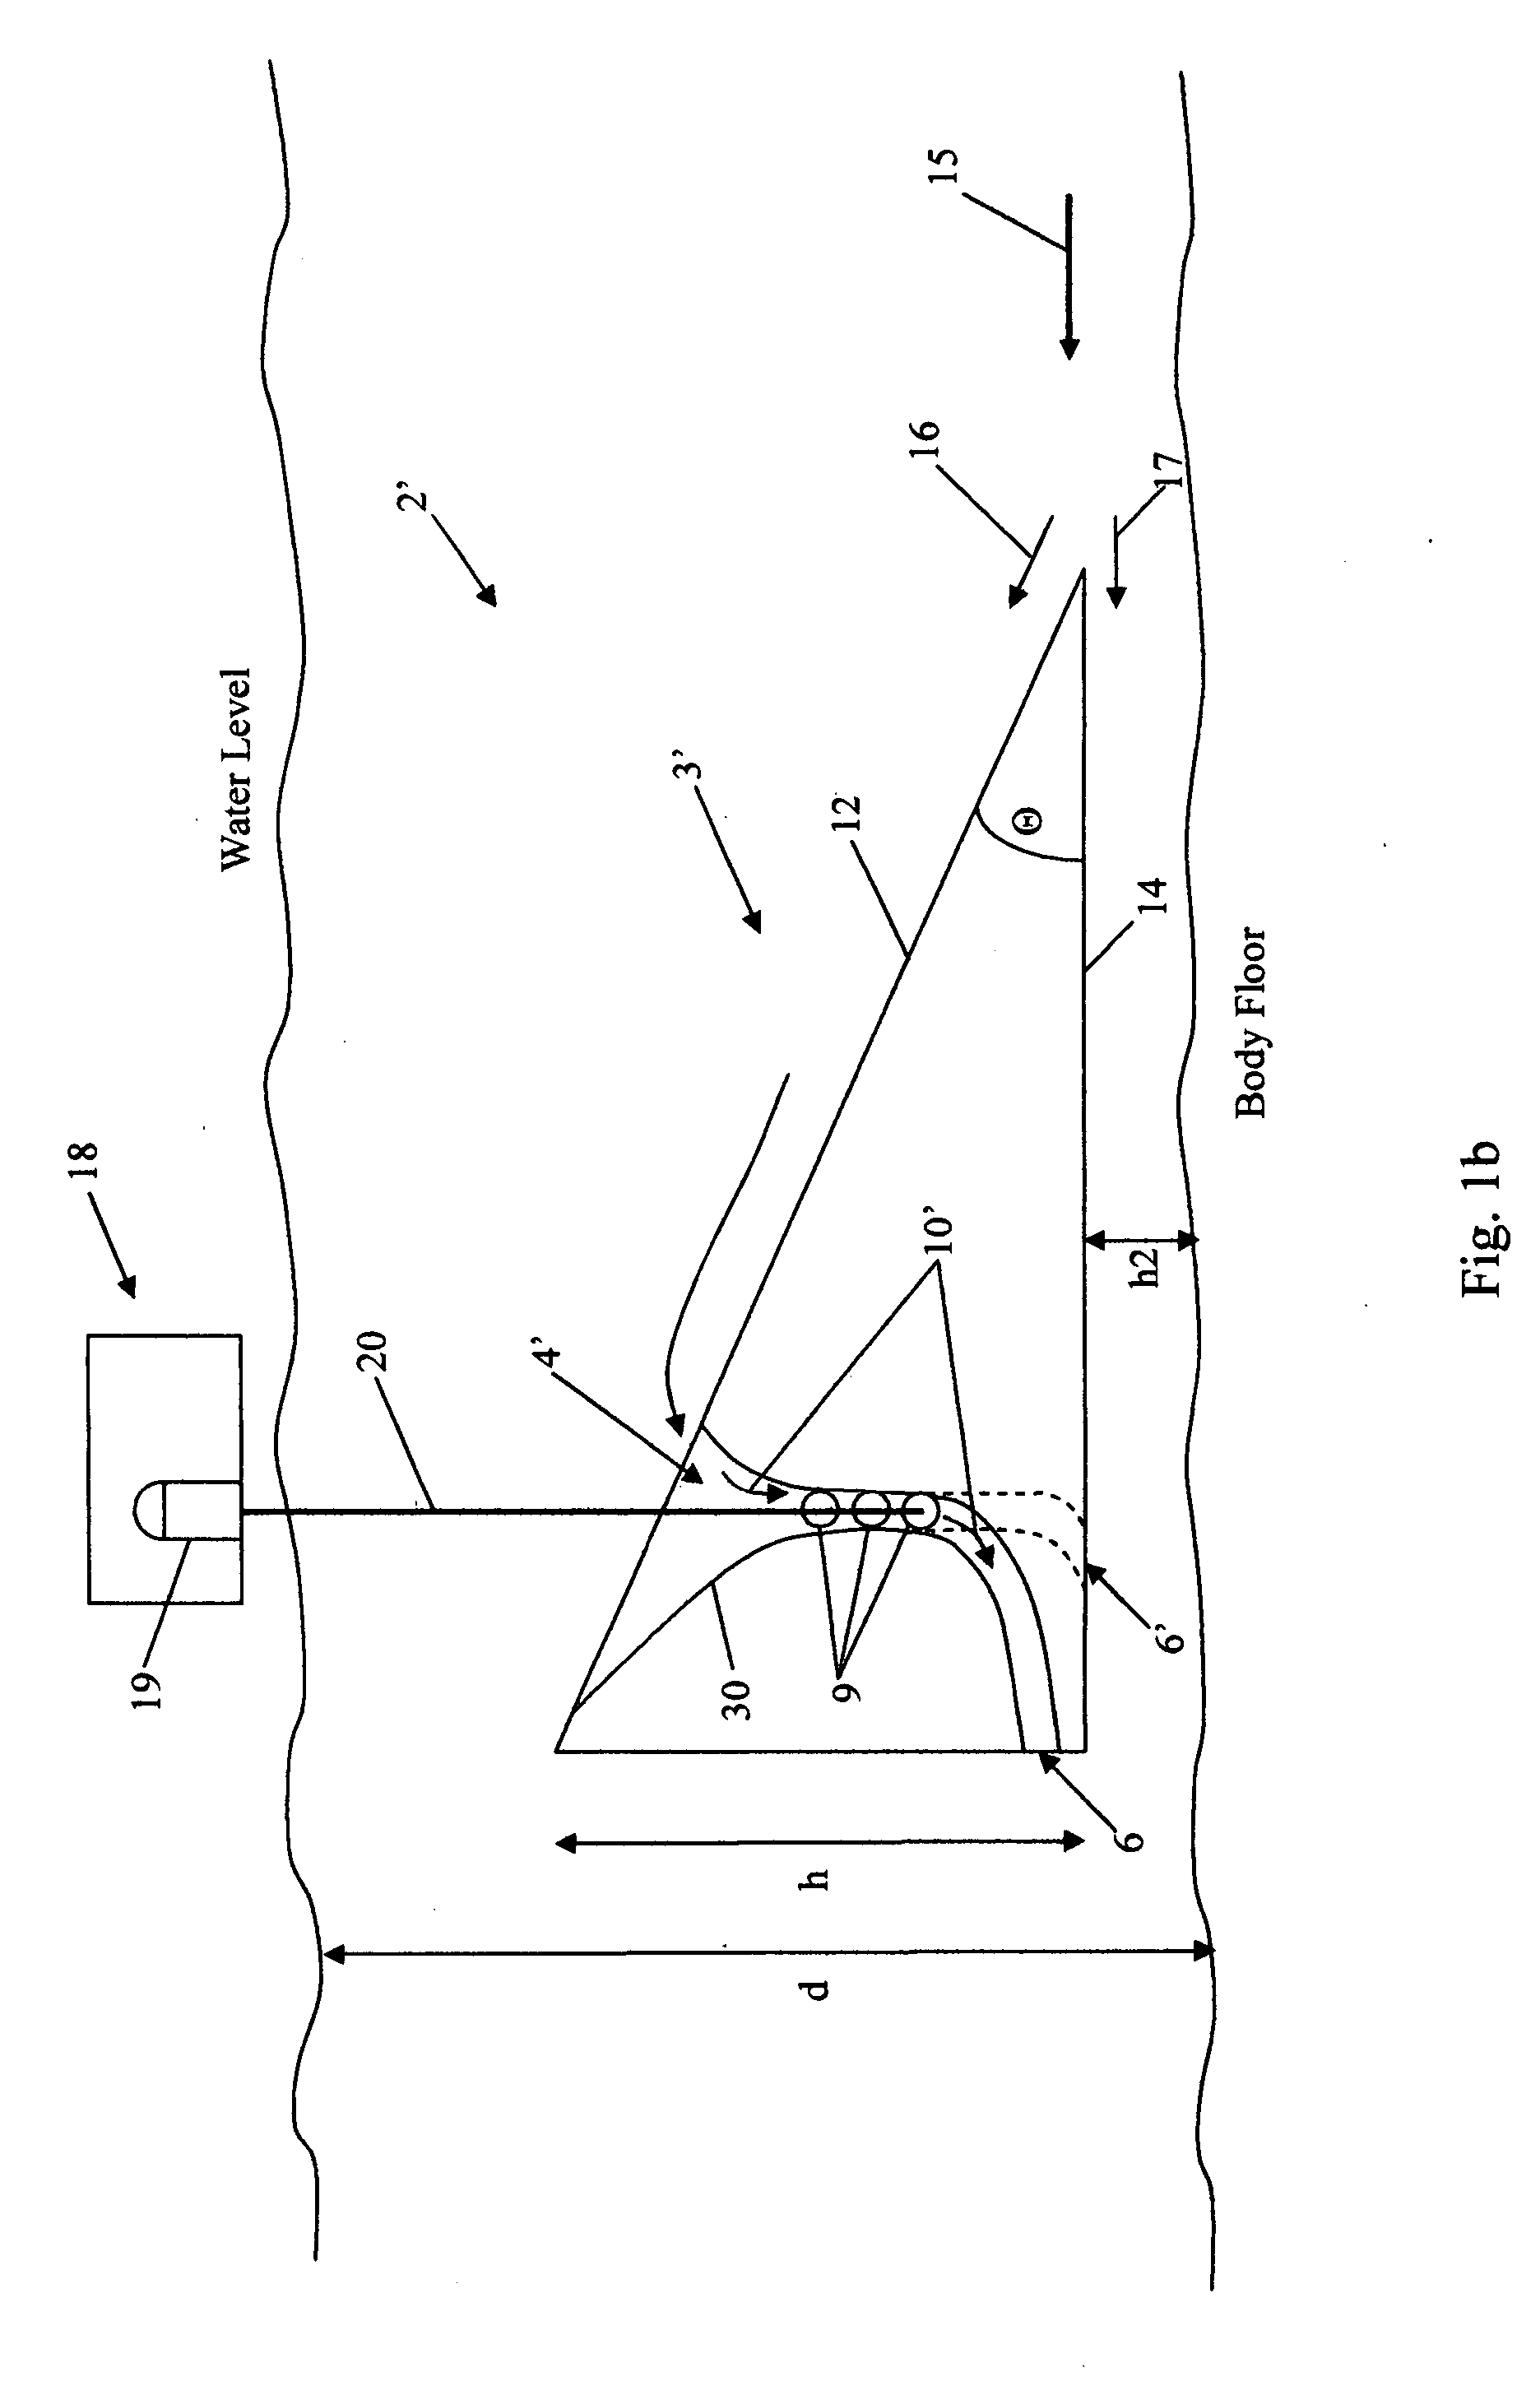 Hydroelectric power plant and method of generating power